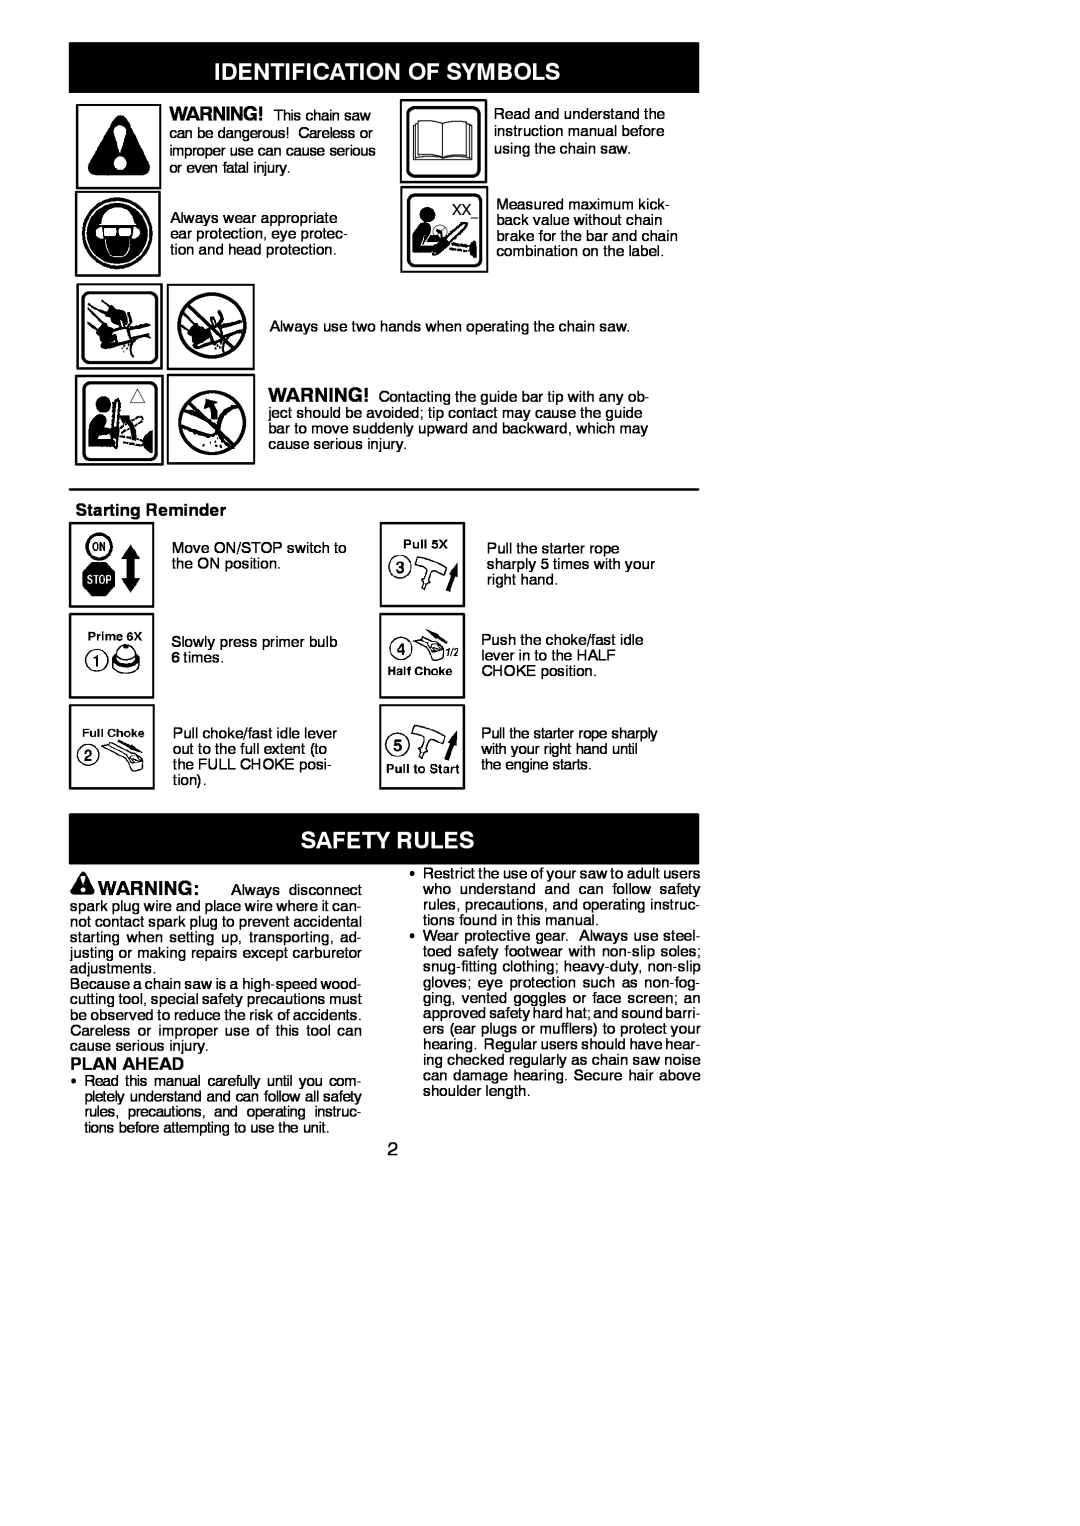 Poulan 545137246 instruction manual Identification Of Symbols, Safety Rules, Starting Reminder, Plan Ahead 